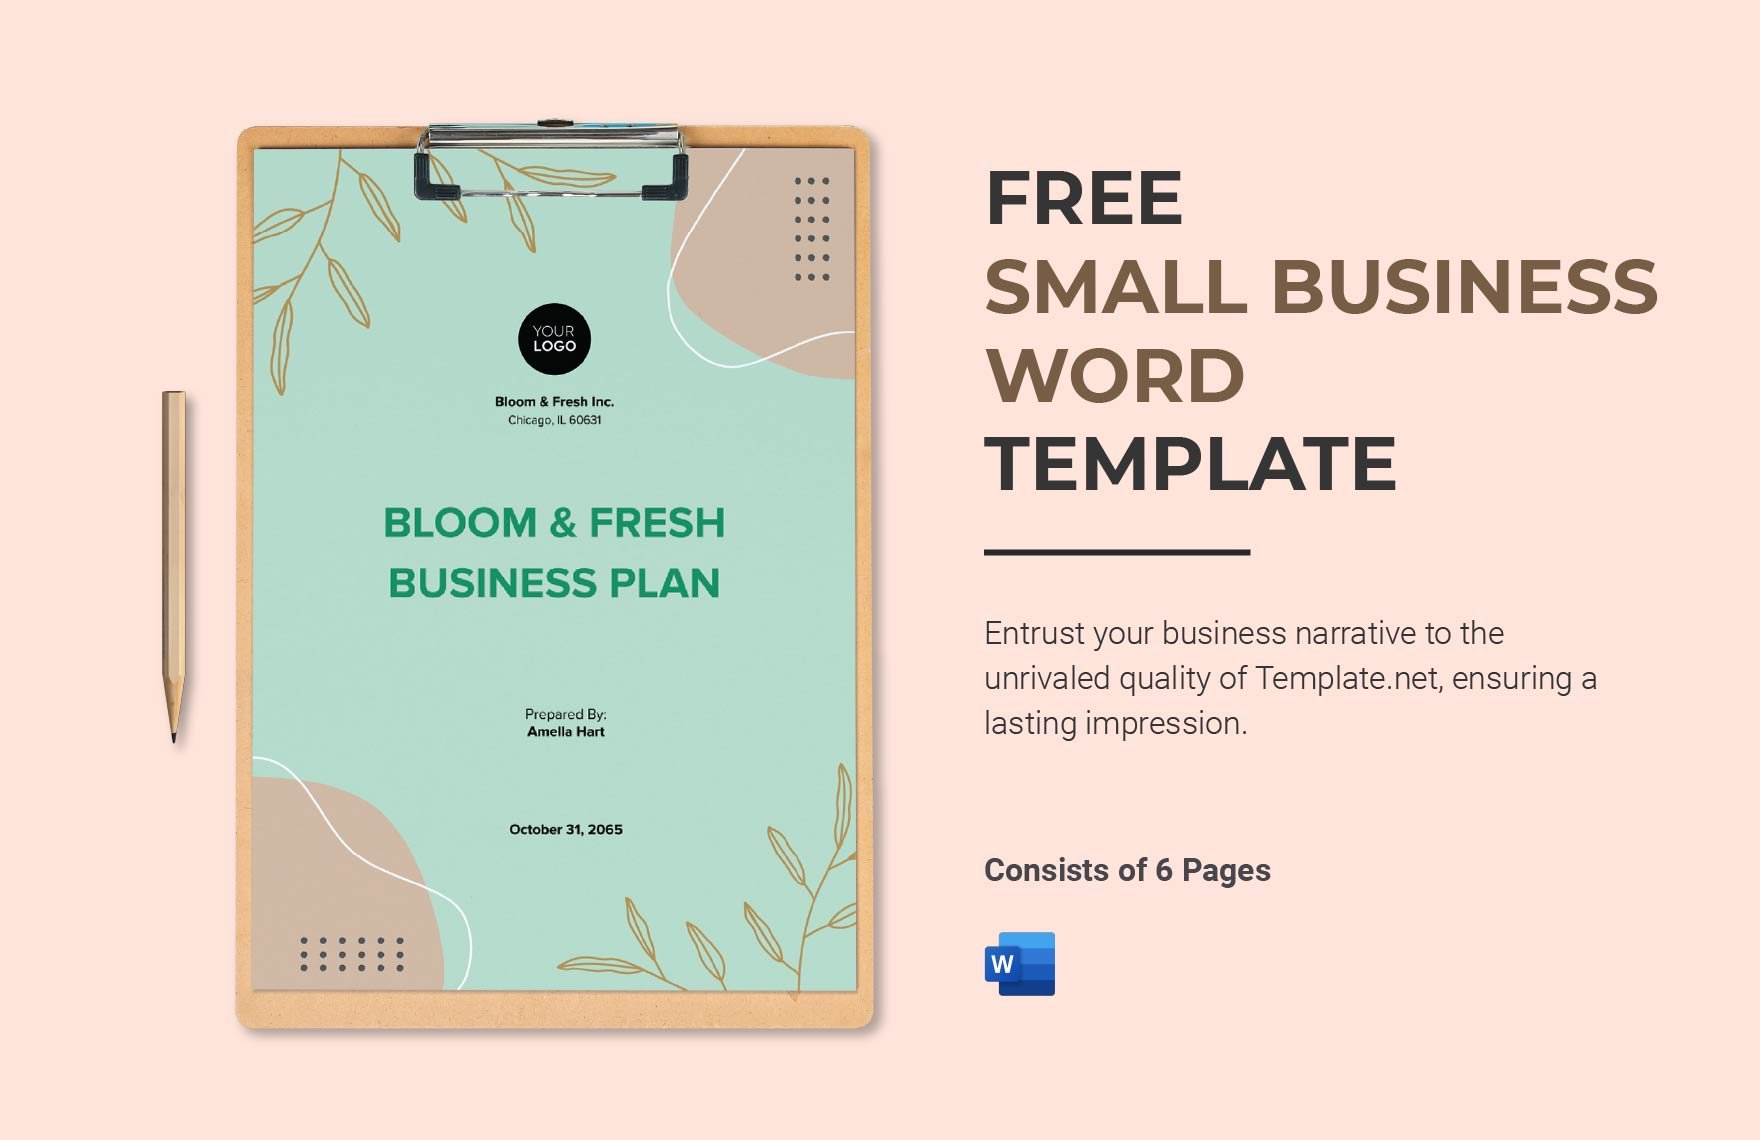 Free Small Business Word Template